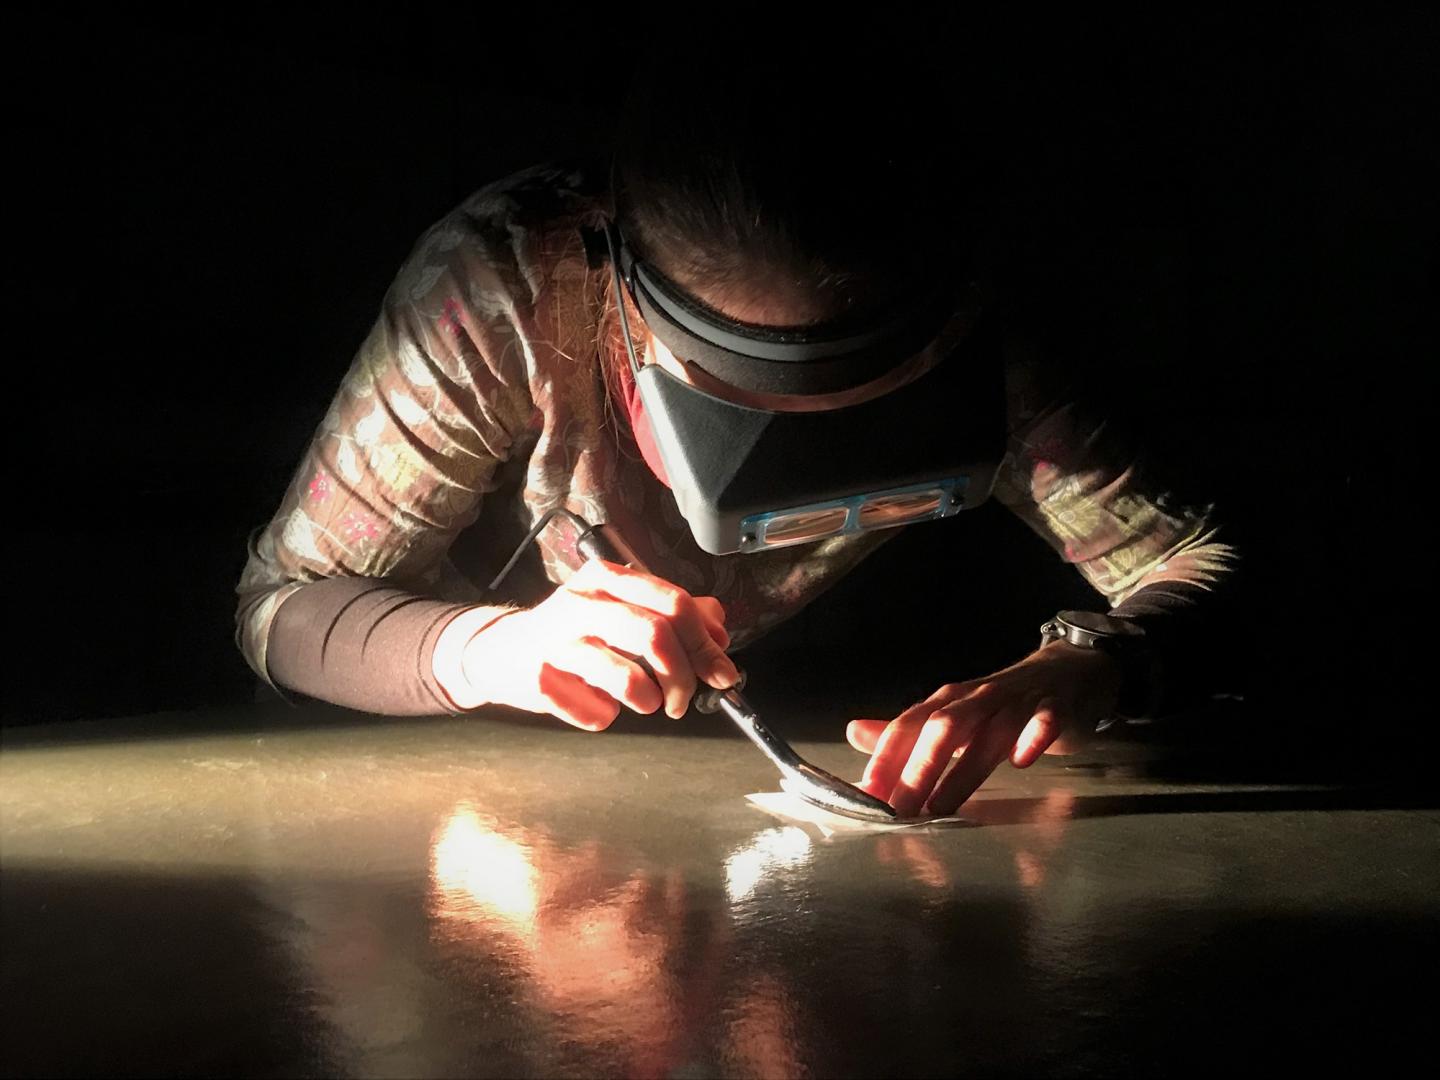 A conservator examines a painting in a darkened room